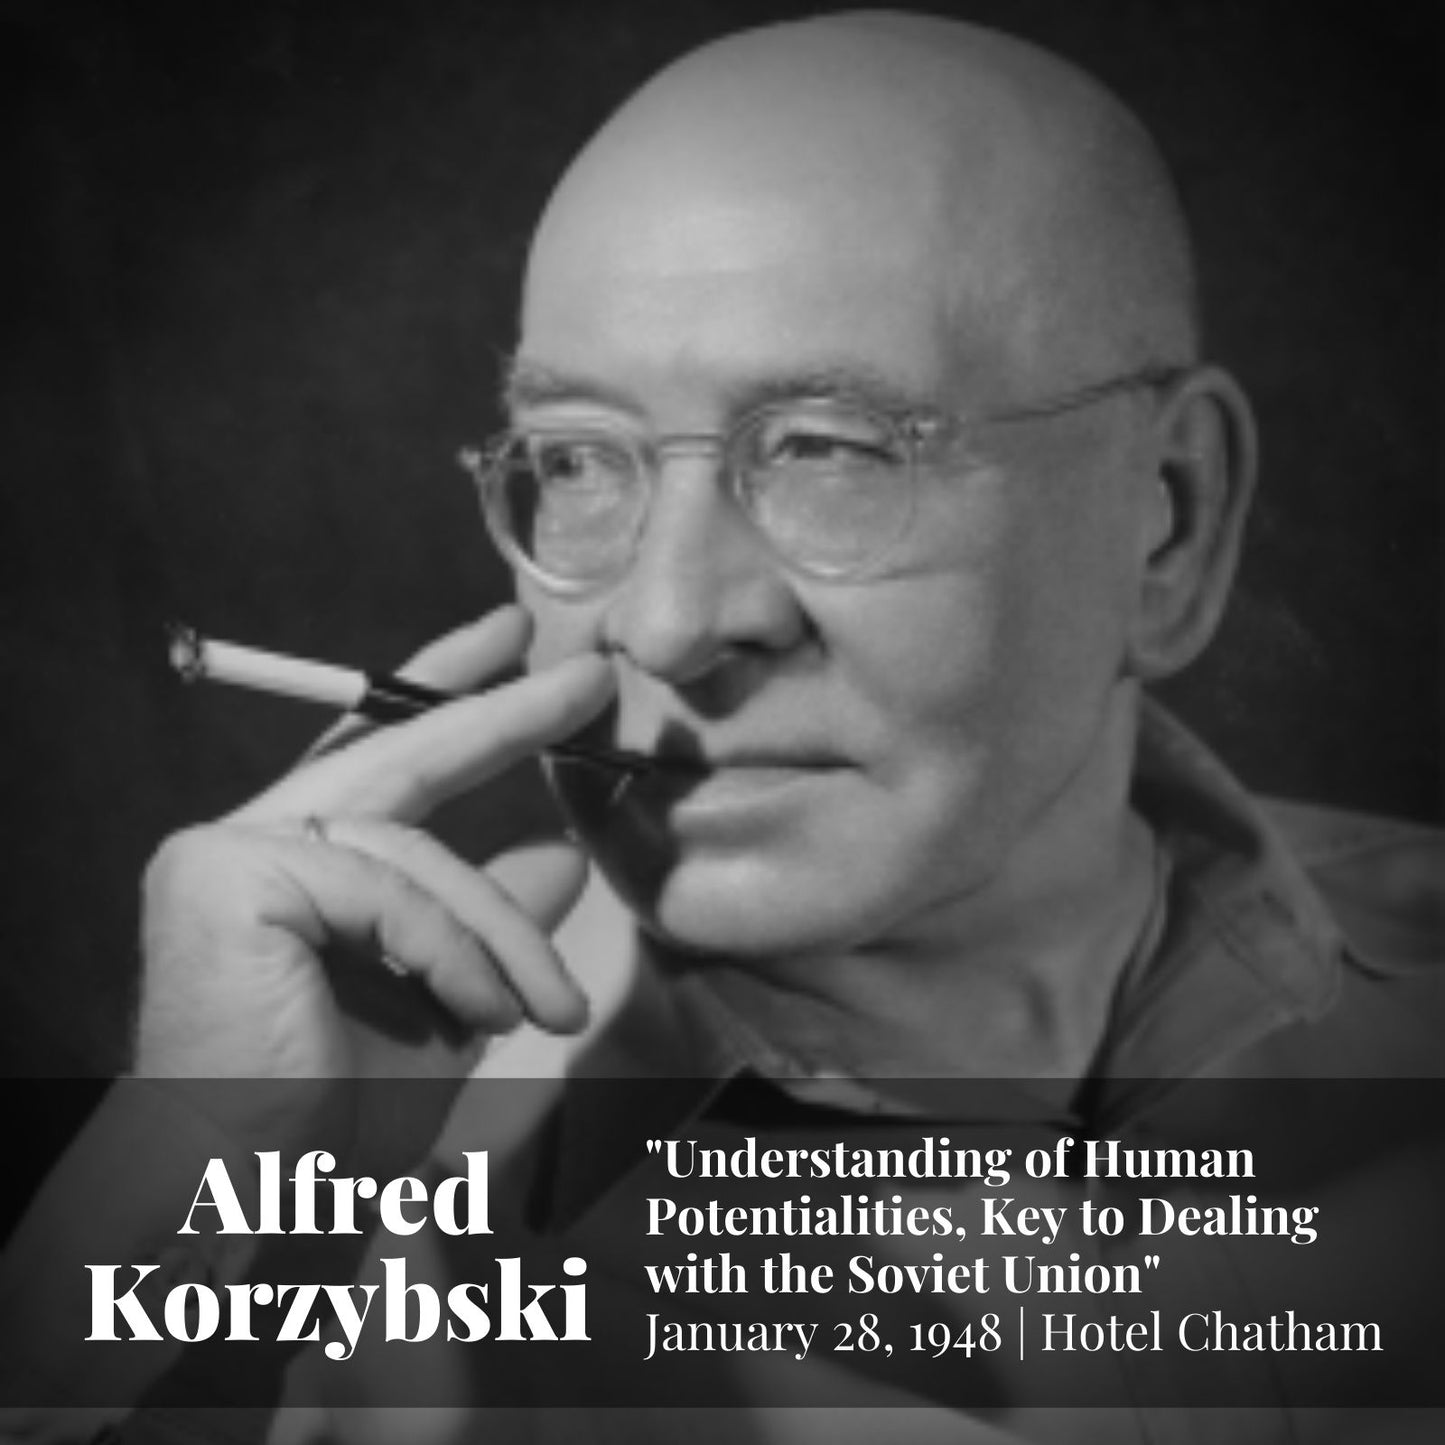 MP3: Understanding of Human Potentialities, Key to Dealing with the Soviet Union (Hotel Chatham 1948)